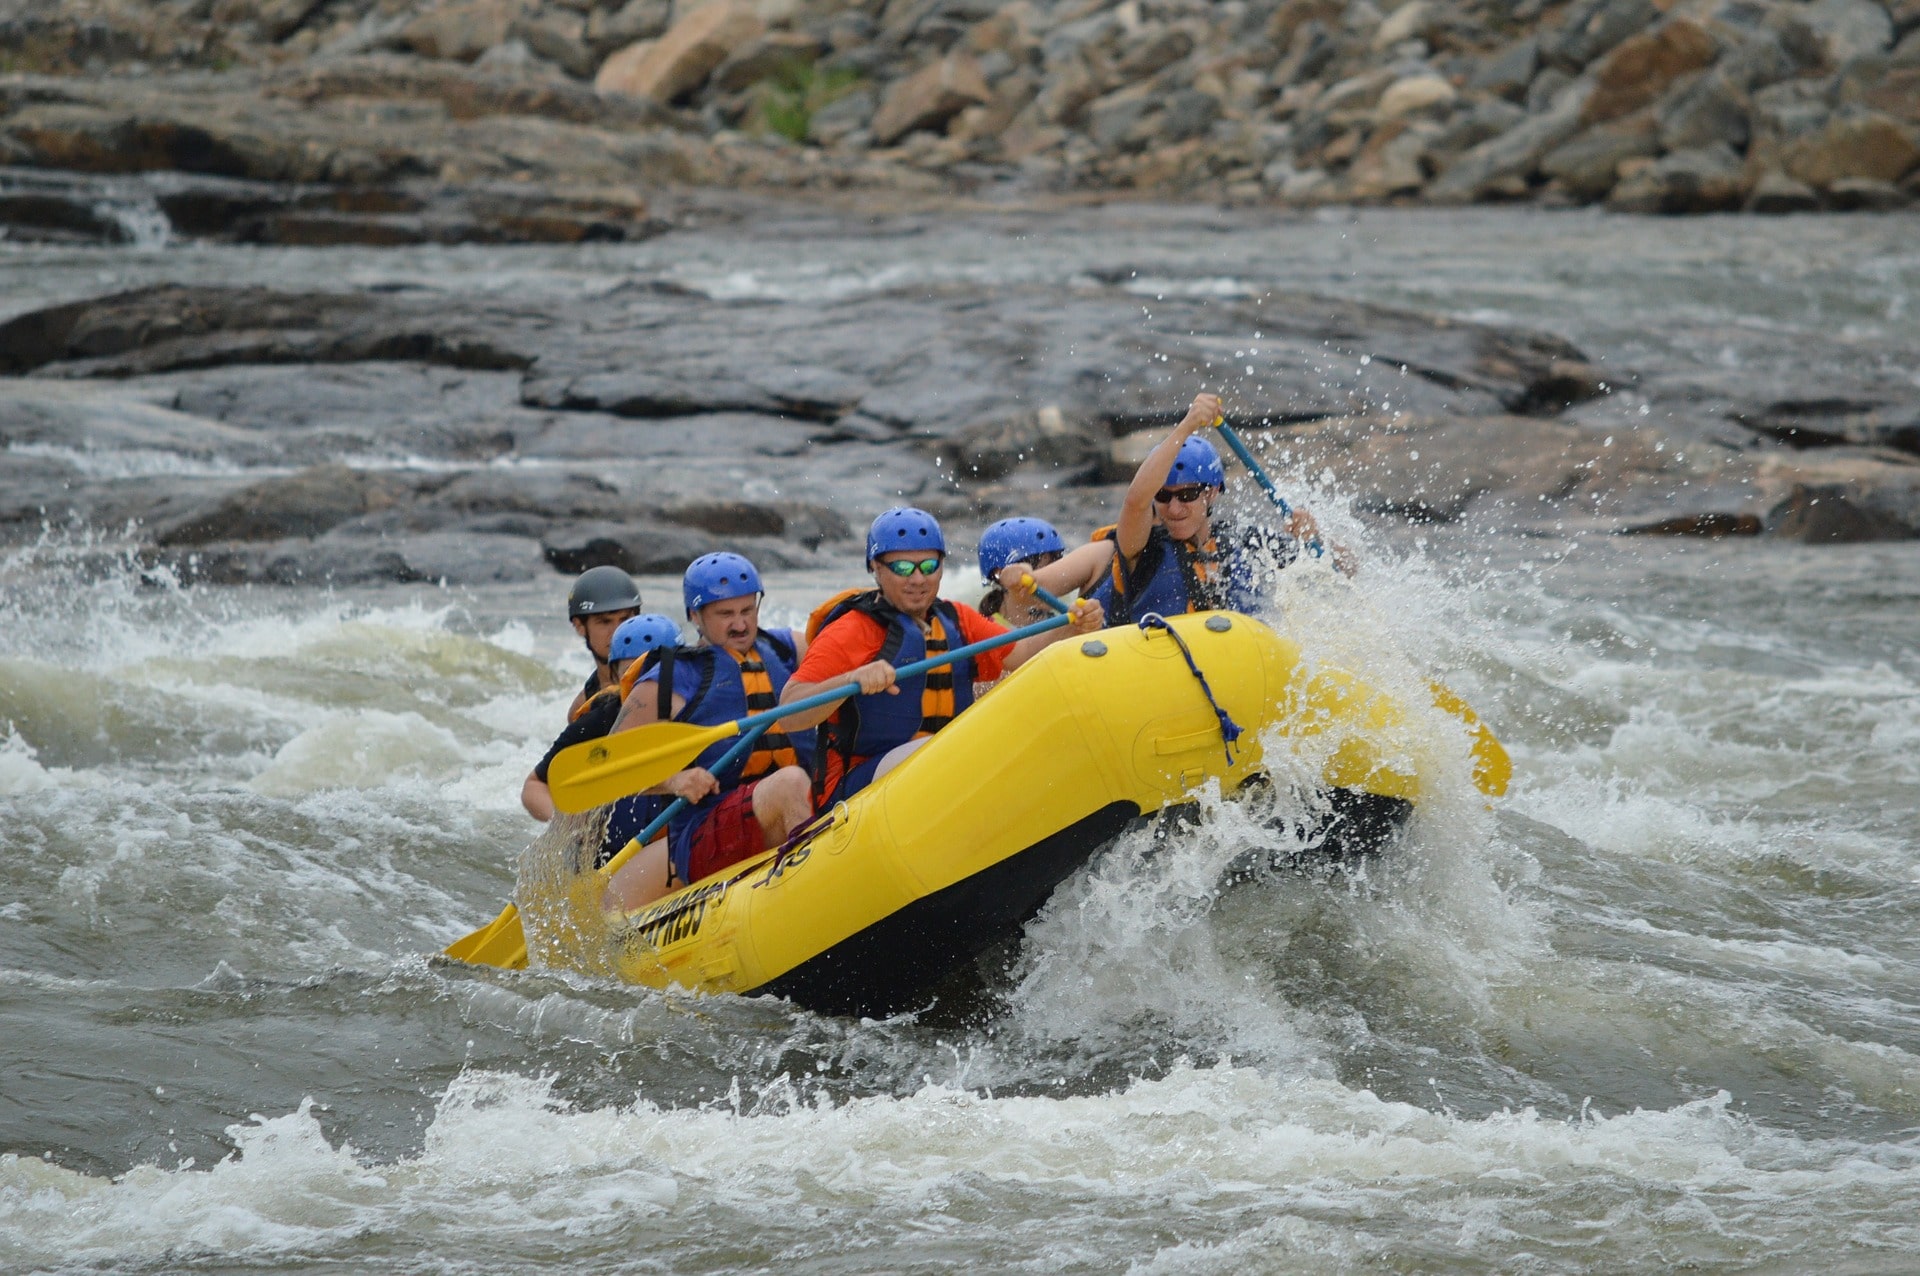 the image shows a group of men in an orange inflatable raft as they battle a rivers whitewater rapids